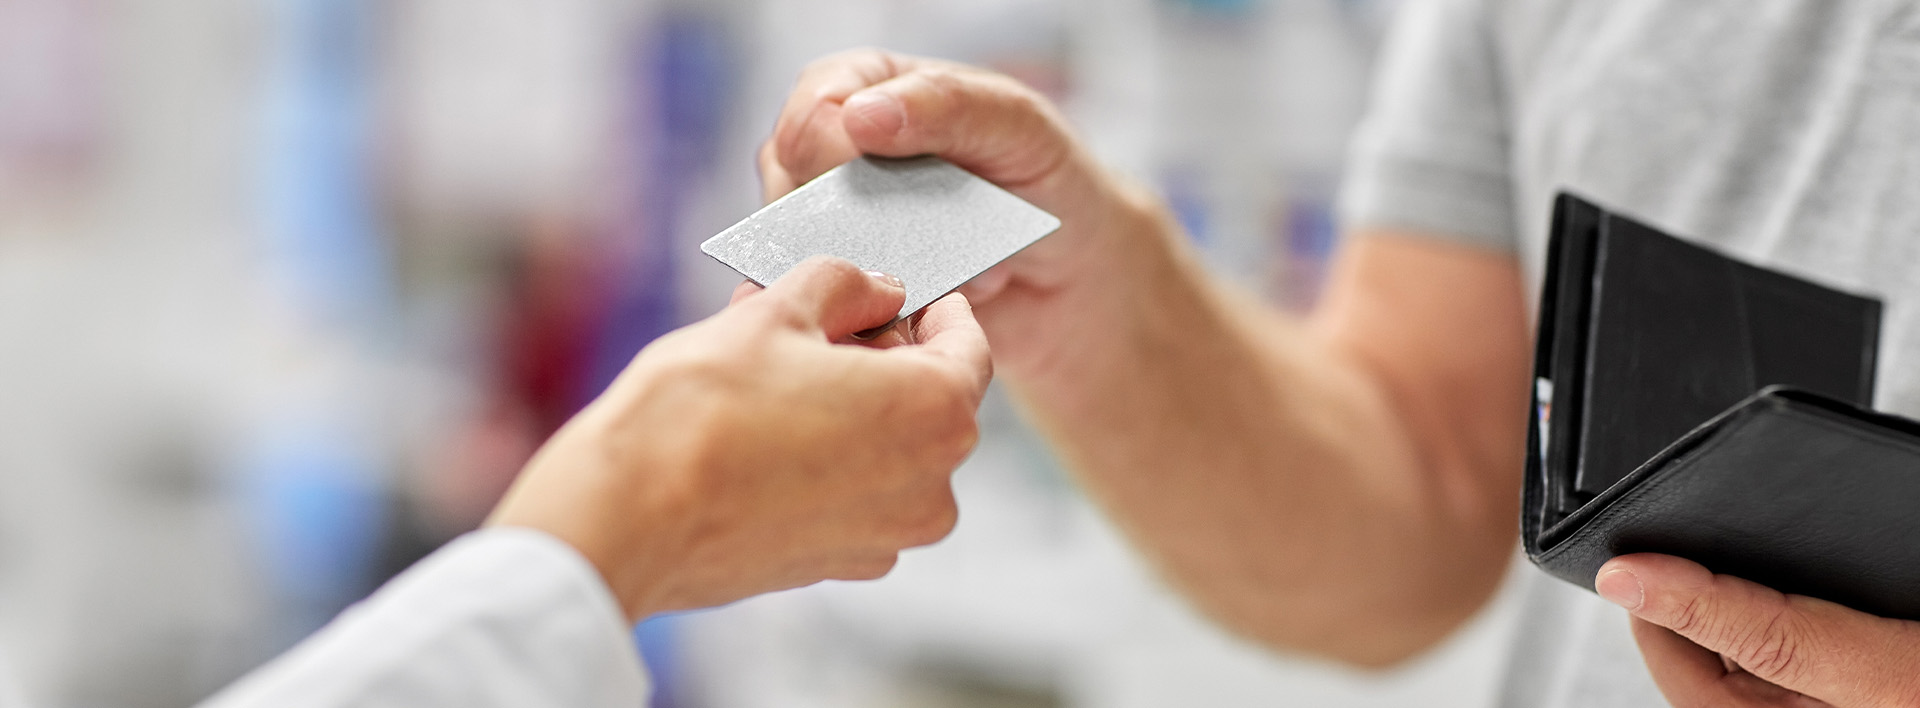 medicine payment and finance people concept close up of hand giving bank card to pharmacist